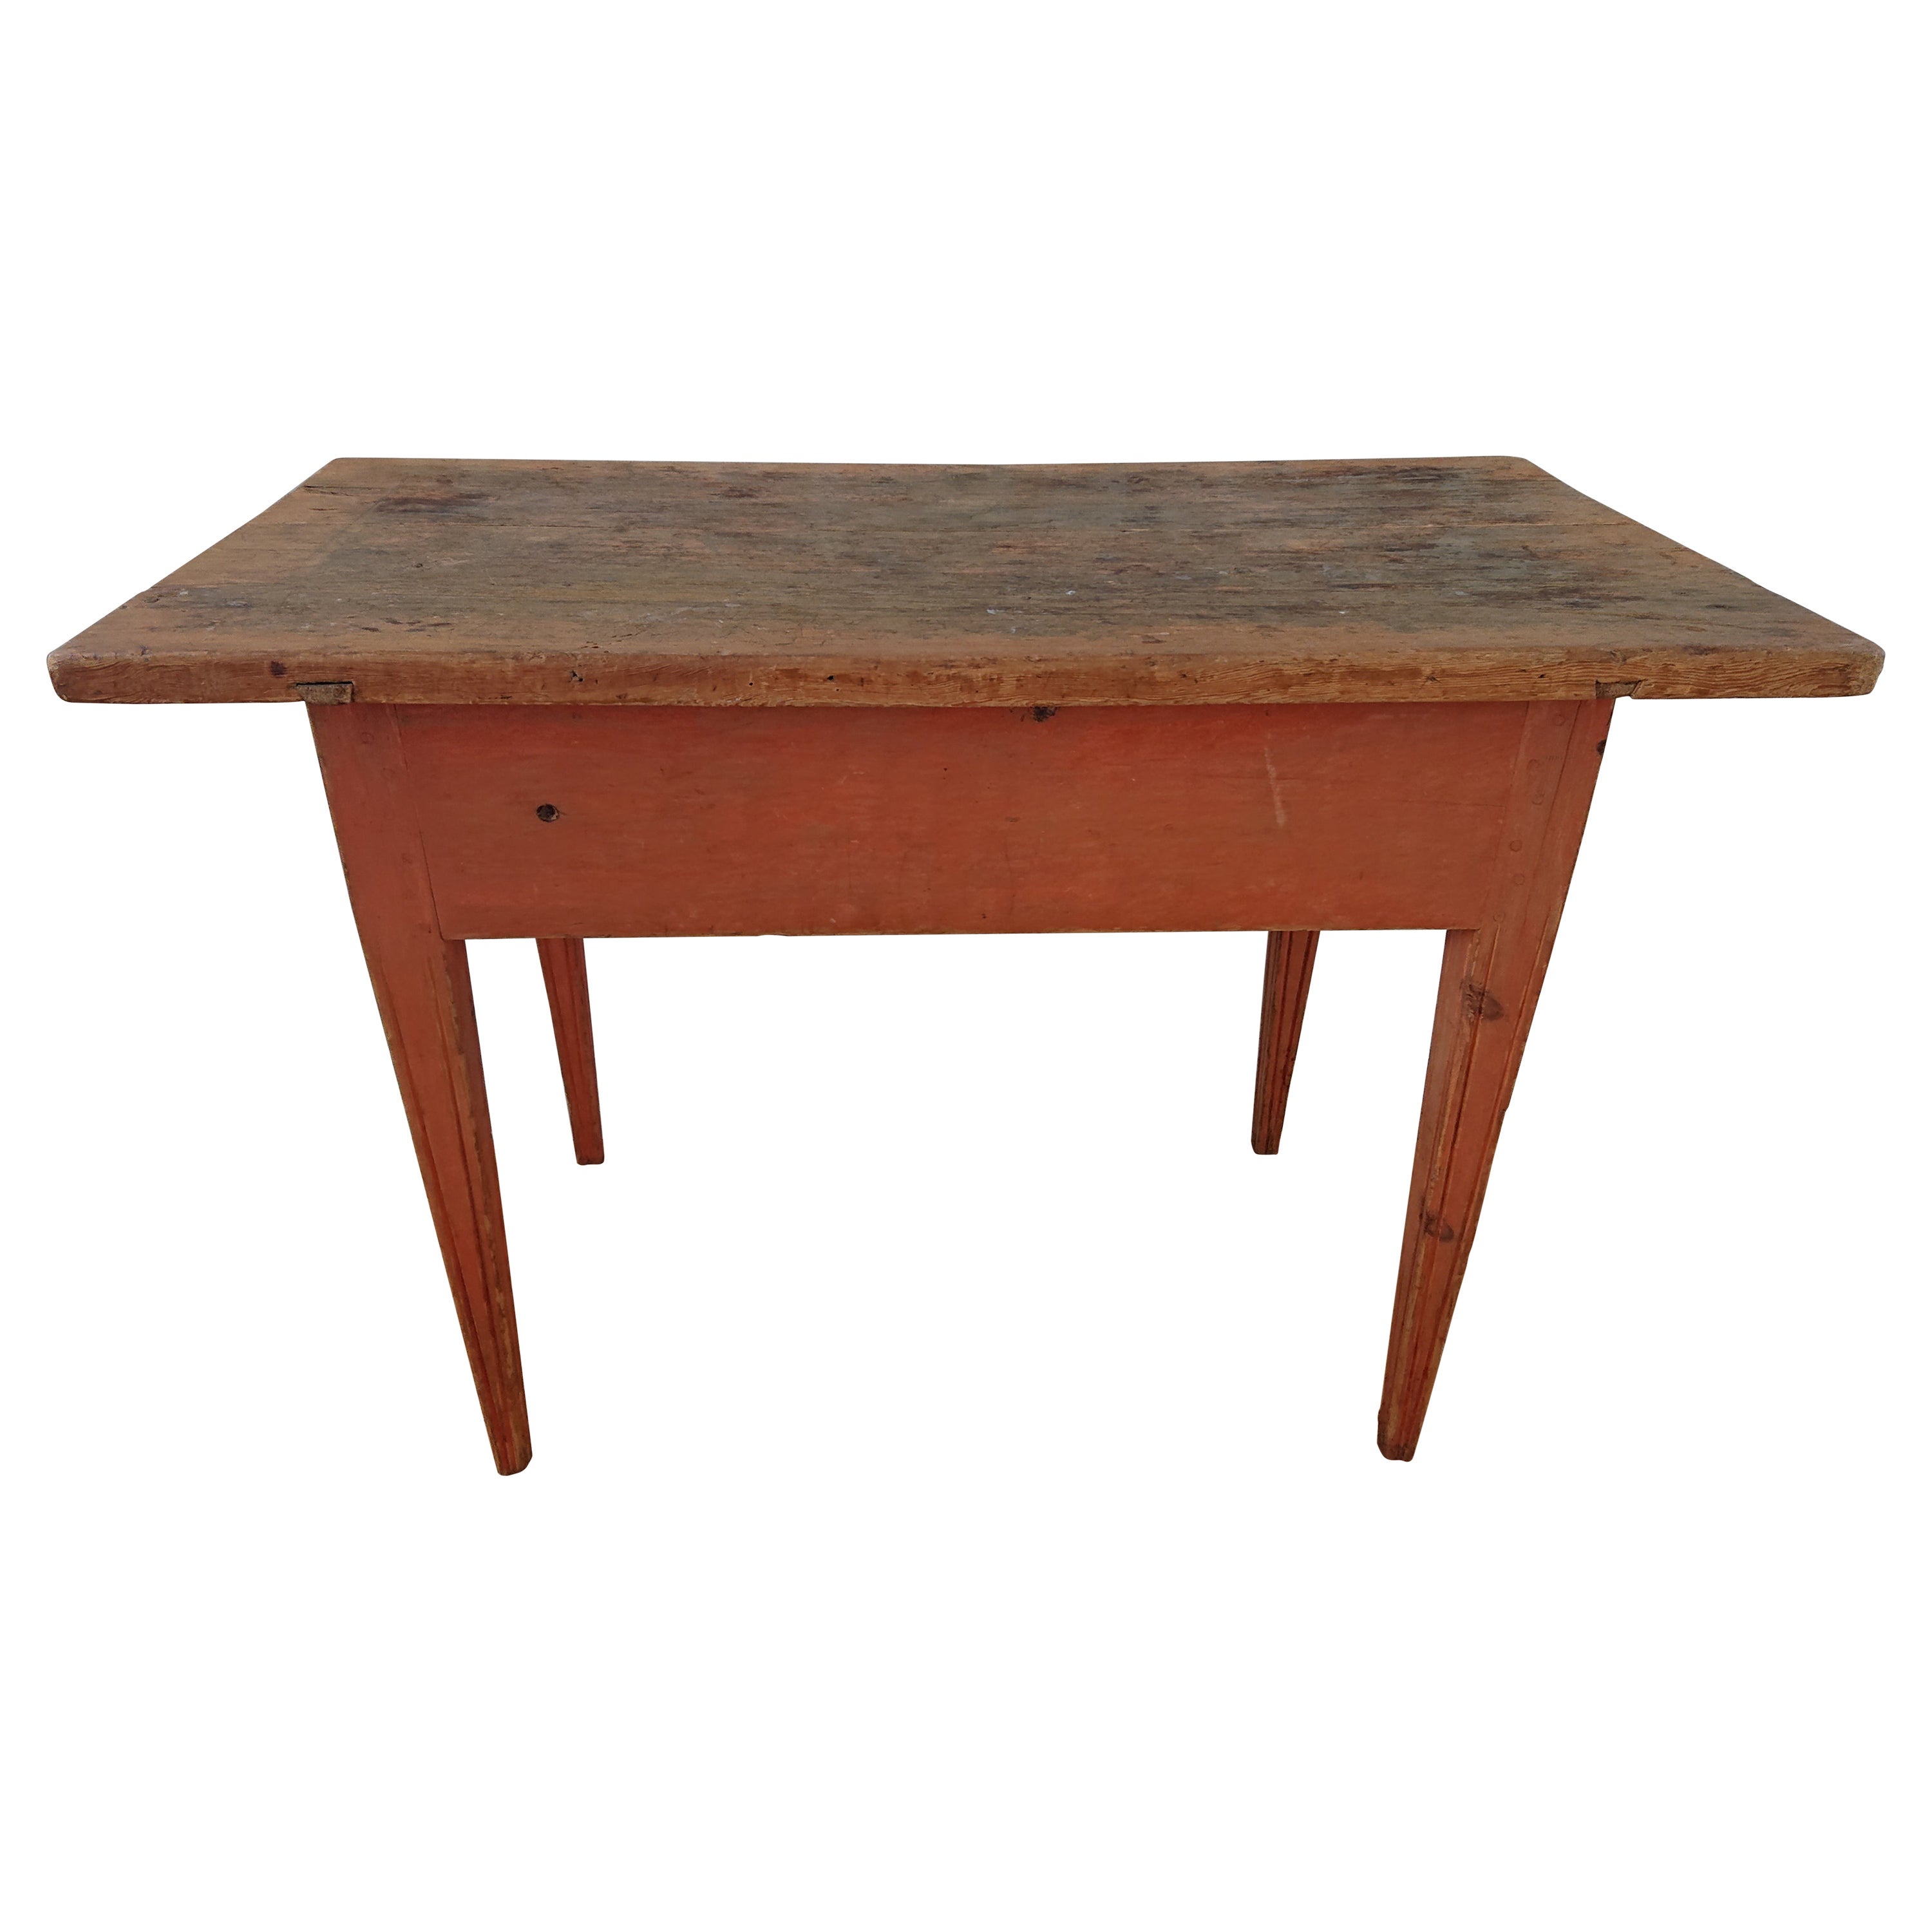 Early 19th Century Swedish Antique Rustic Gustavian Table with Original Paint